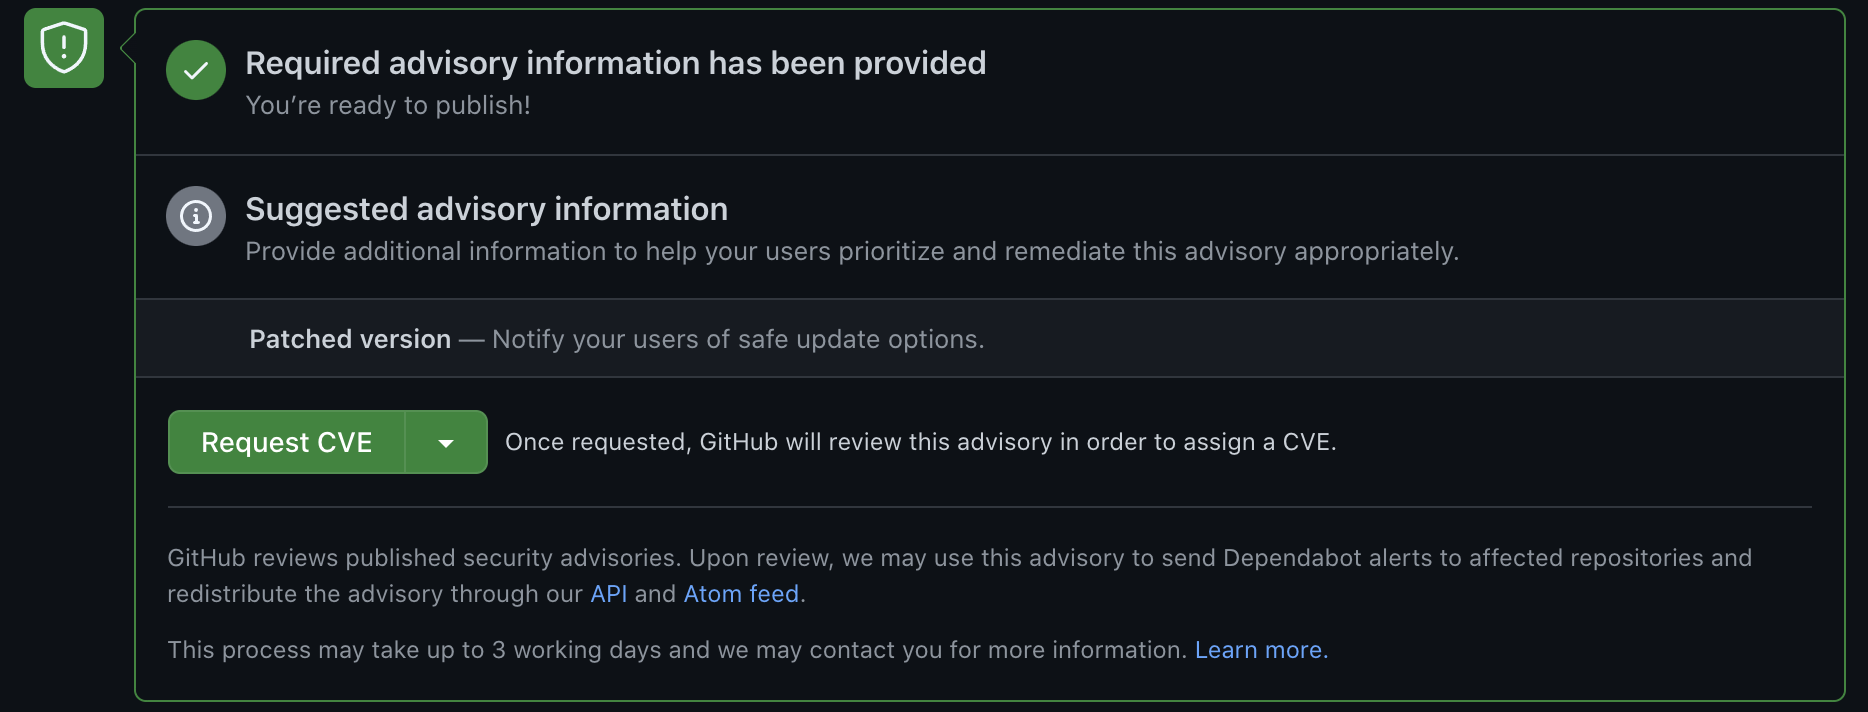 Image of the GitHub Security Advisory interface showing the Request CVE button